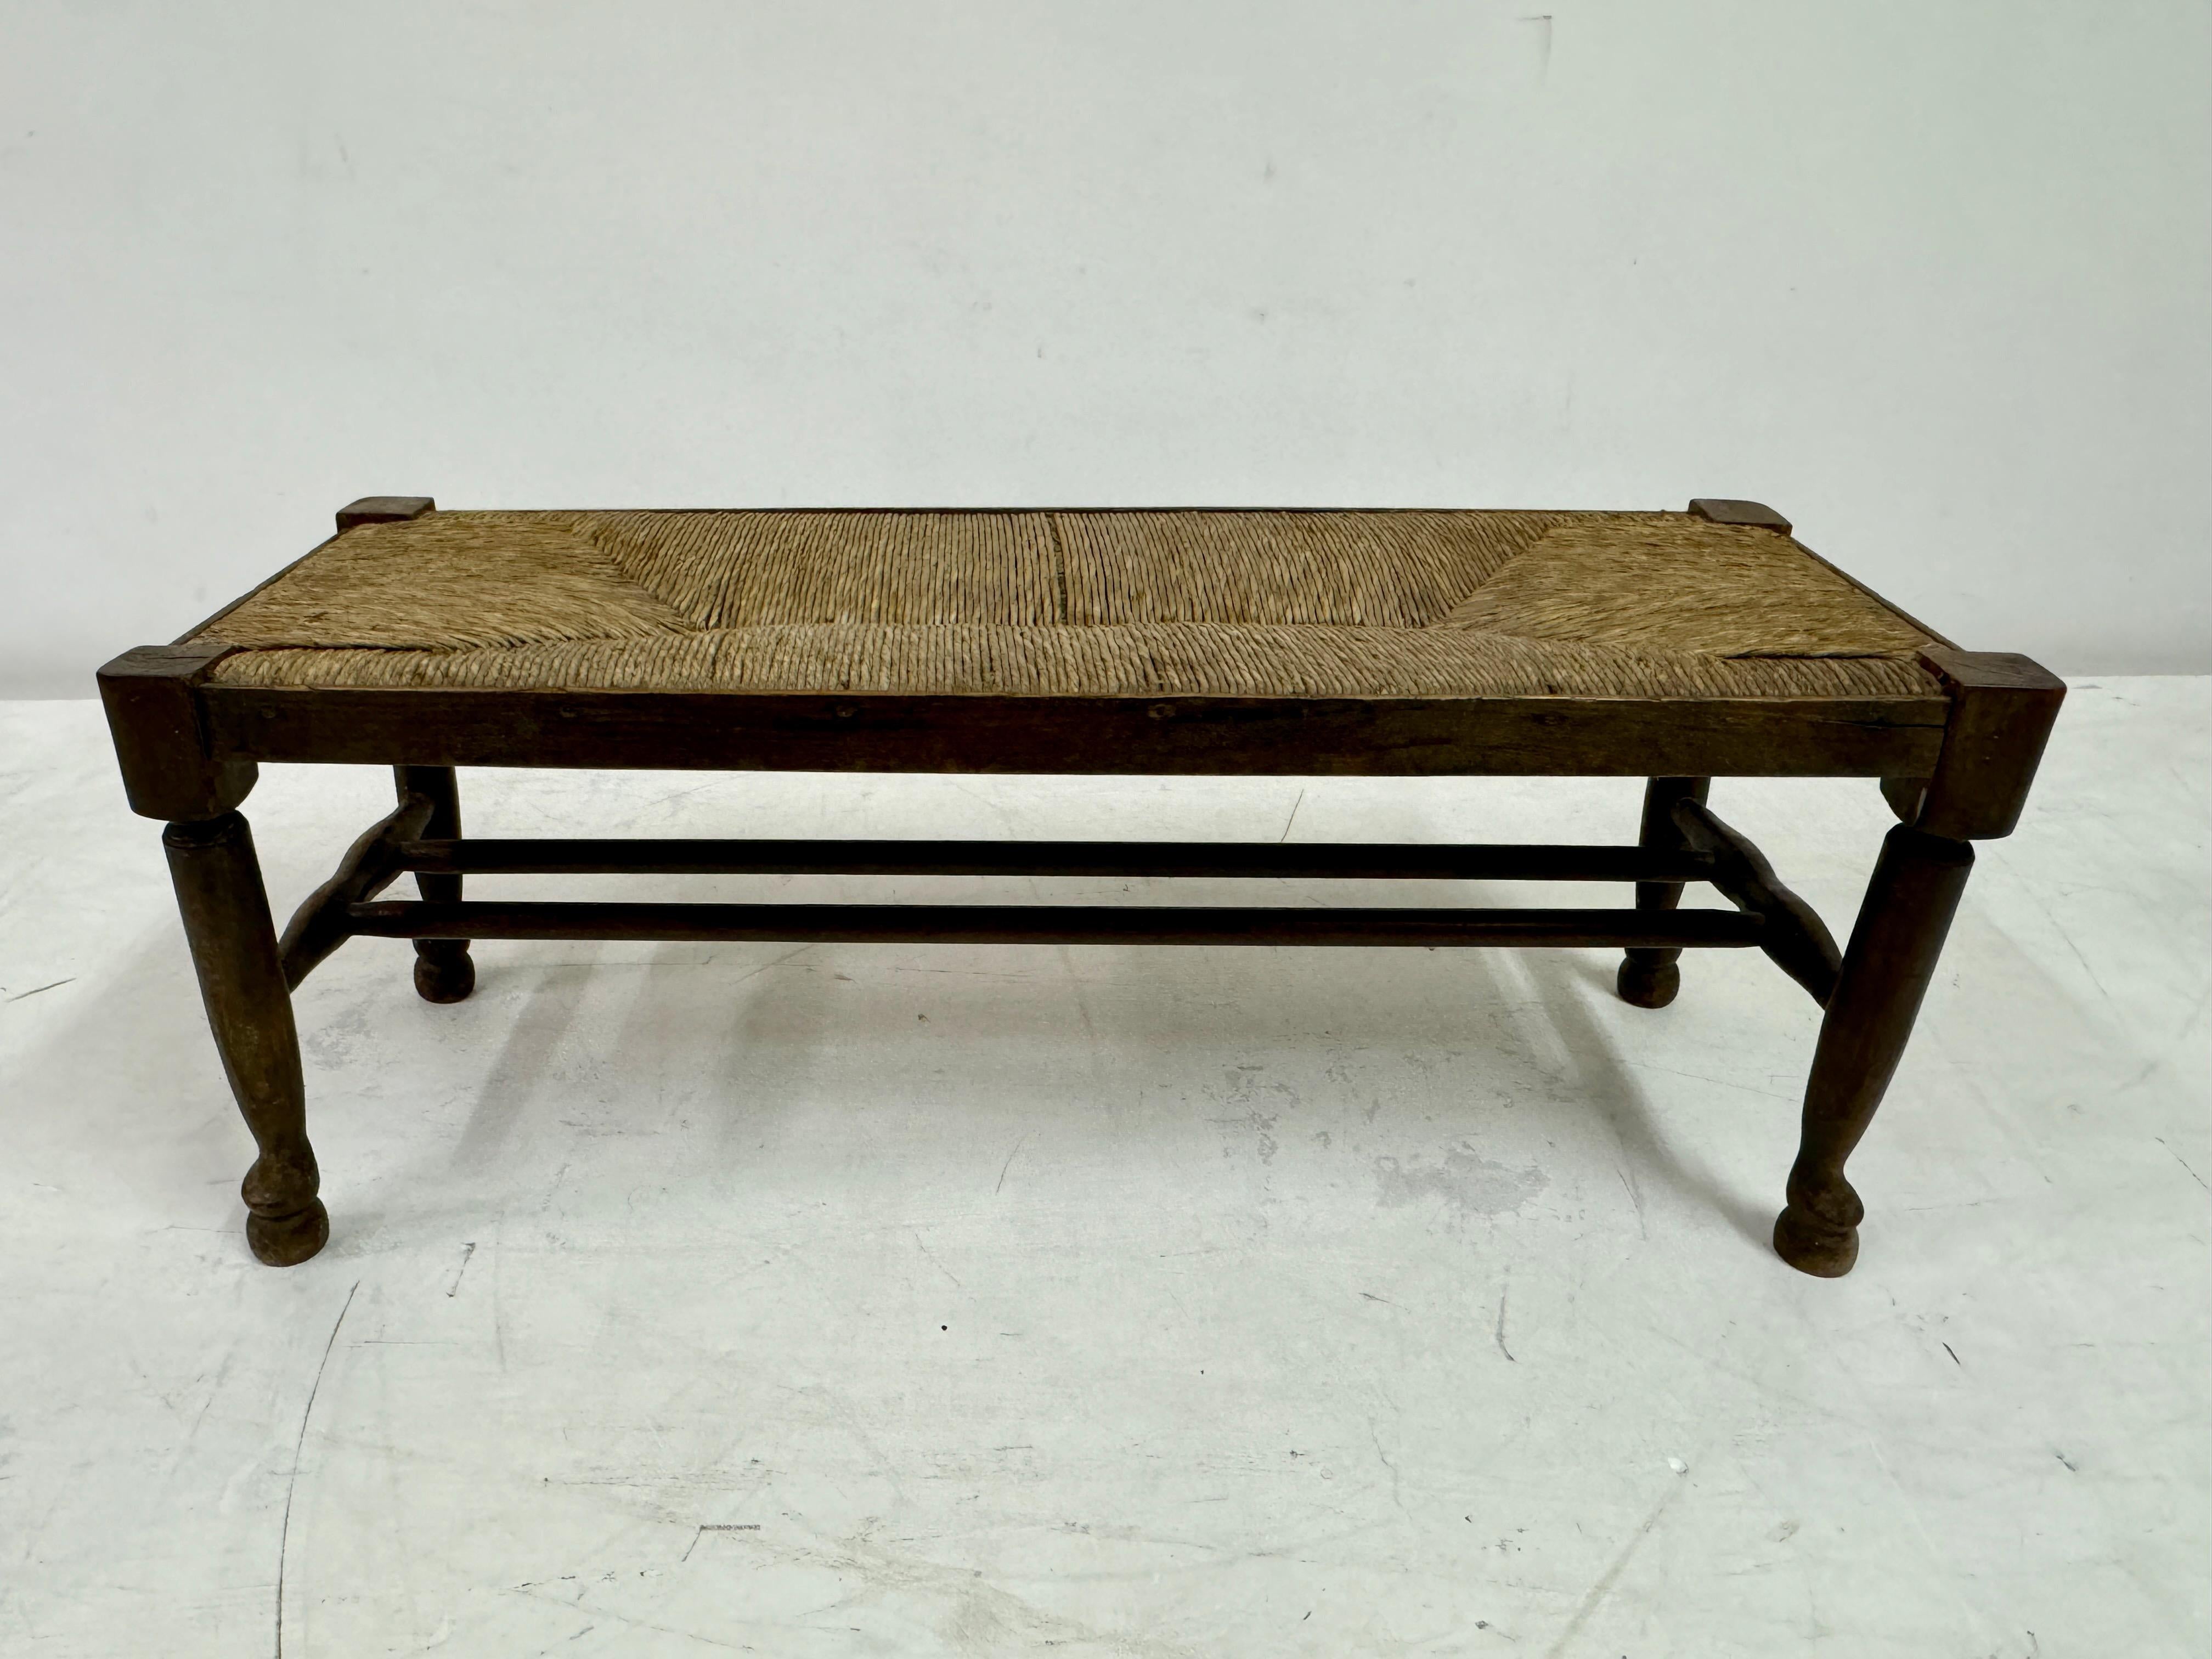 British Antique Bench or Stool with Rush Seat